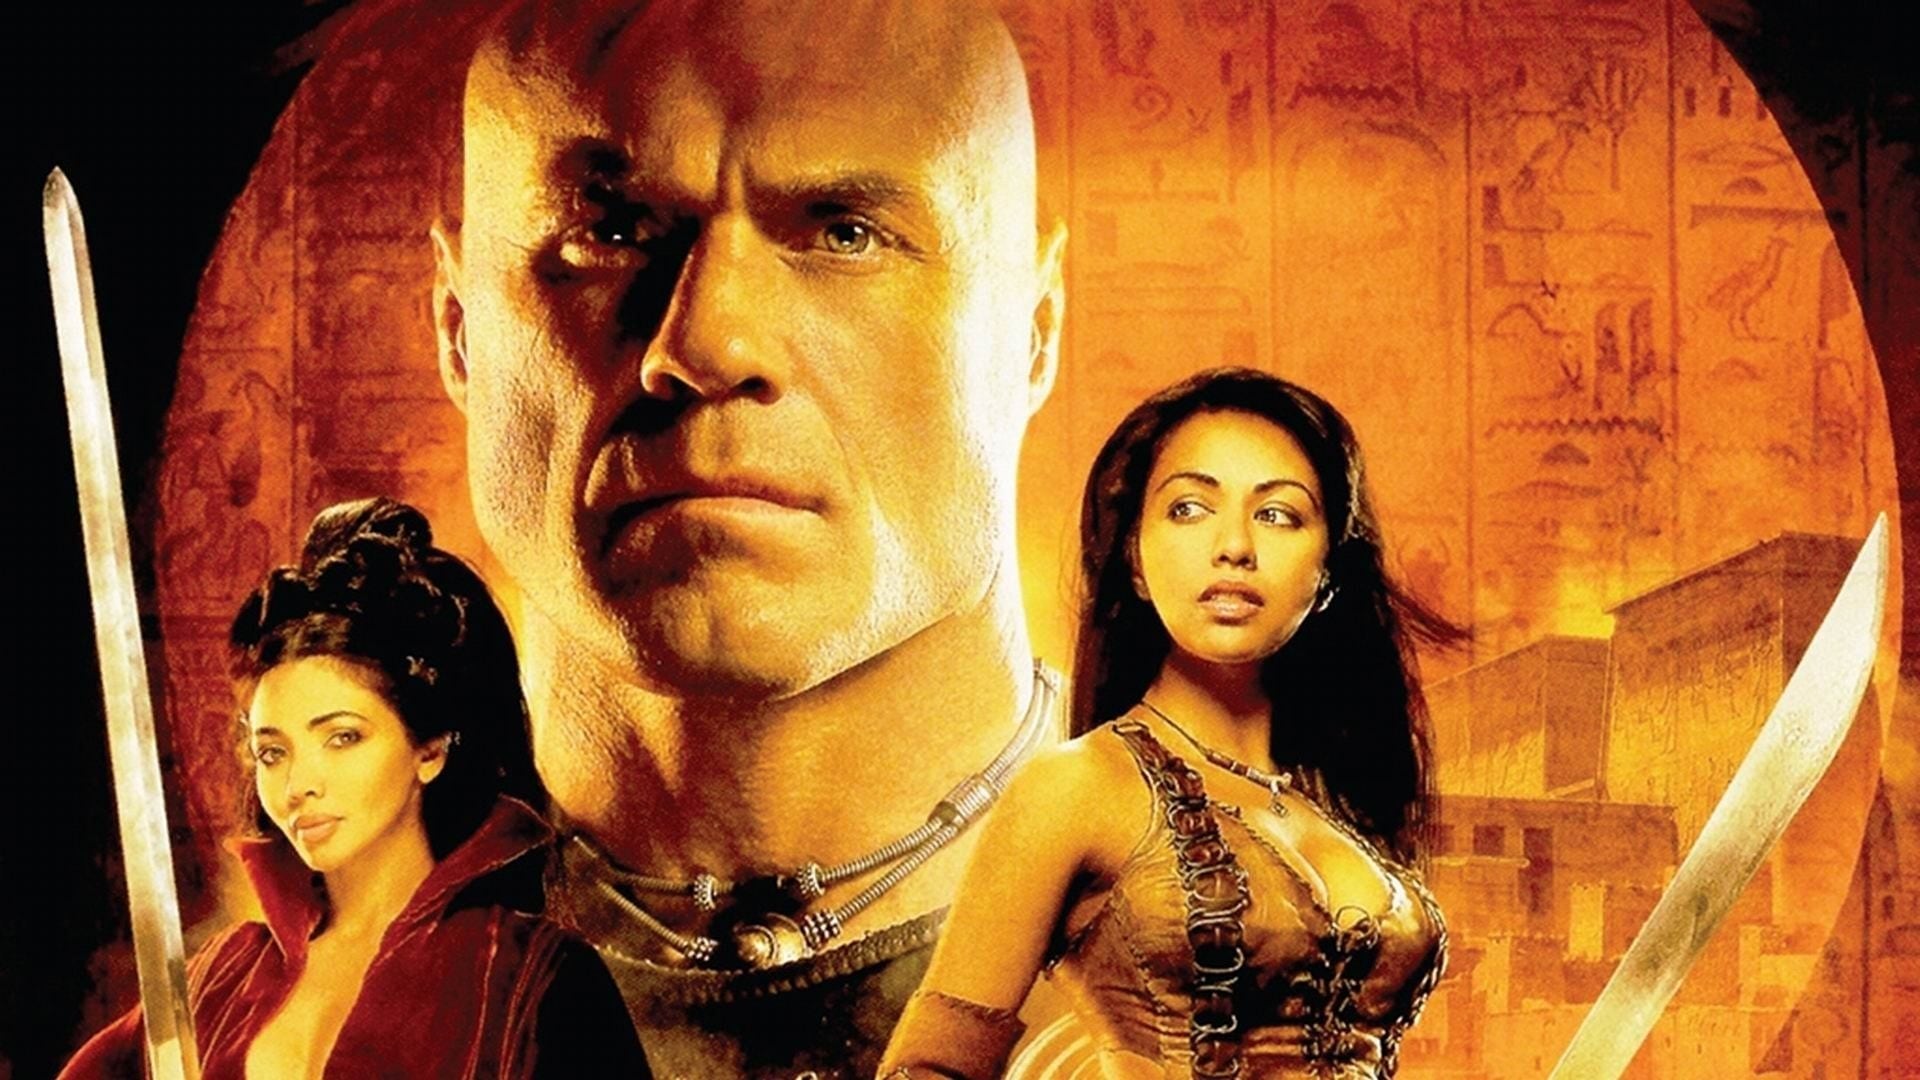 The Scorpion King 2: Rise of a Warrior 2008 123movies